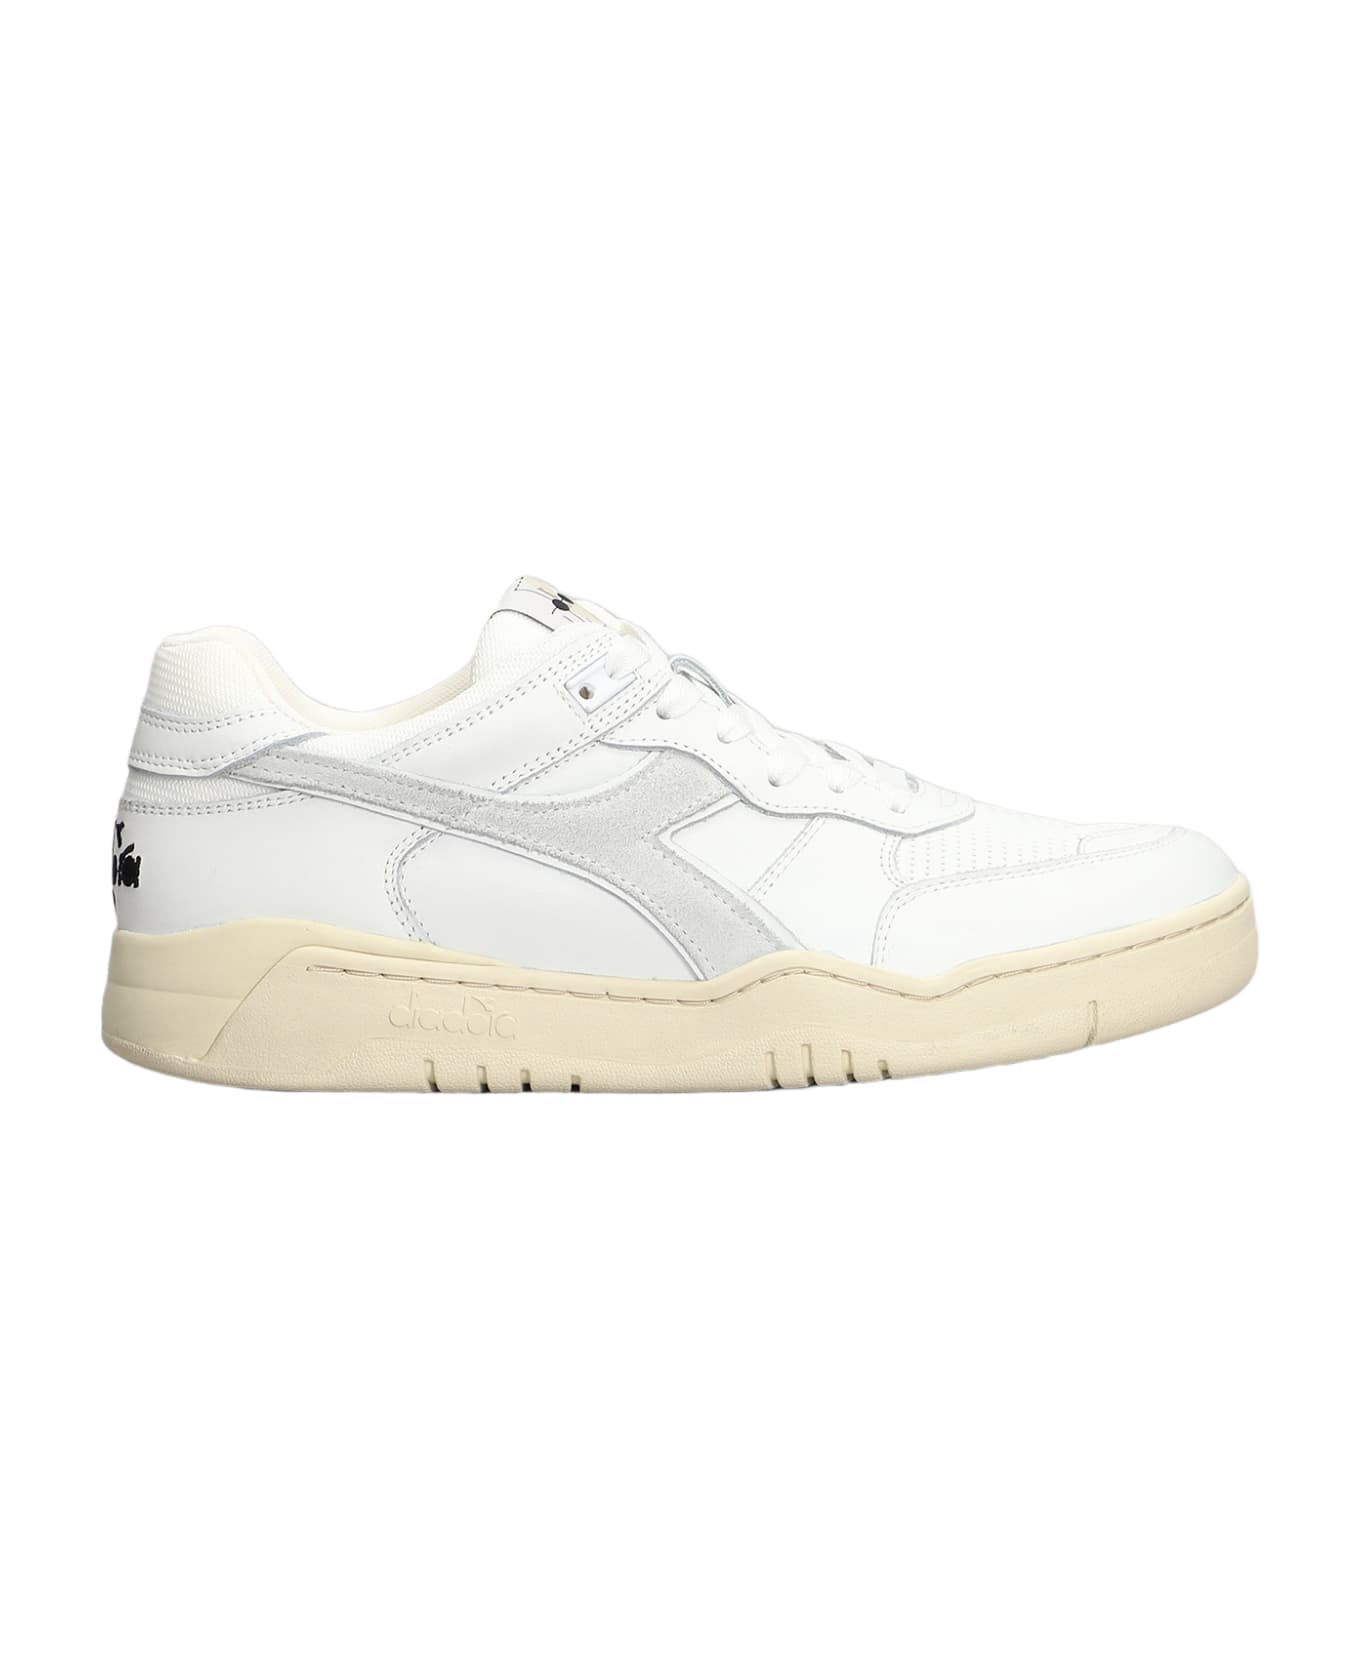 Diadora B.560 Used Sneakers In White Leather - white スニーカー